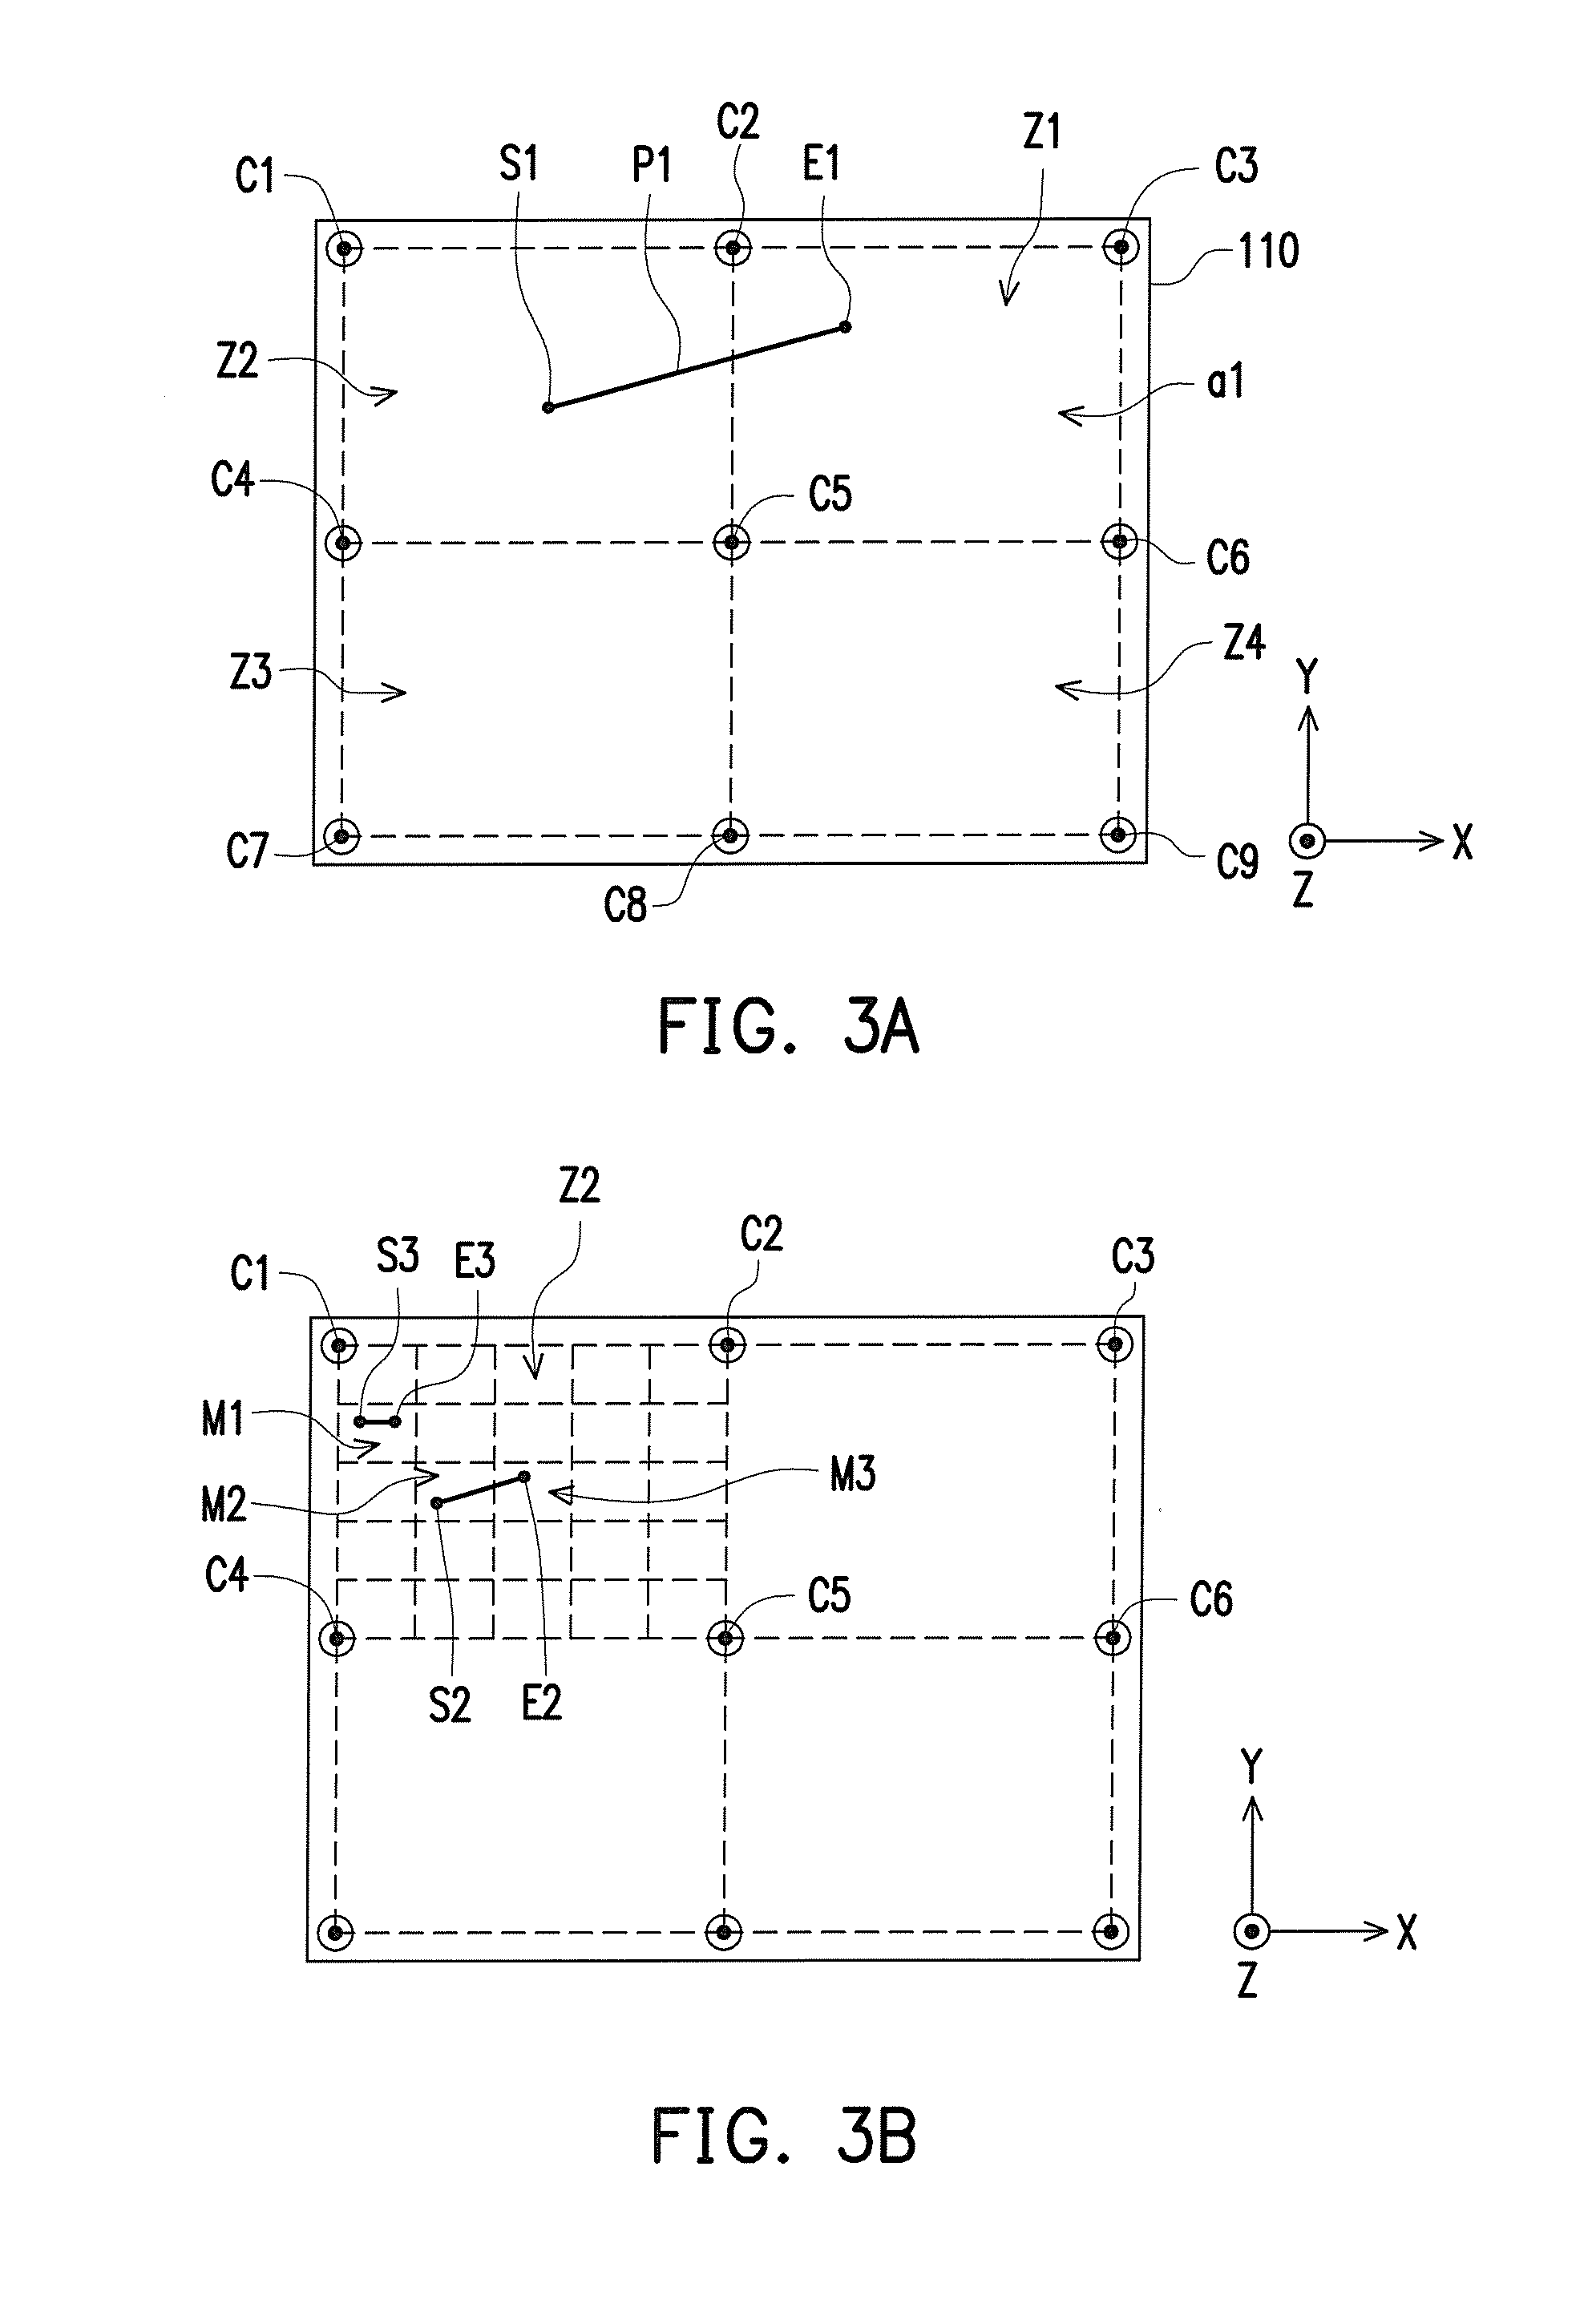 Three-dimensional printing appratus and method for calibrating printing inaccuracy thereof